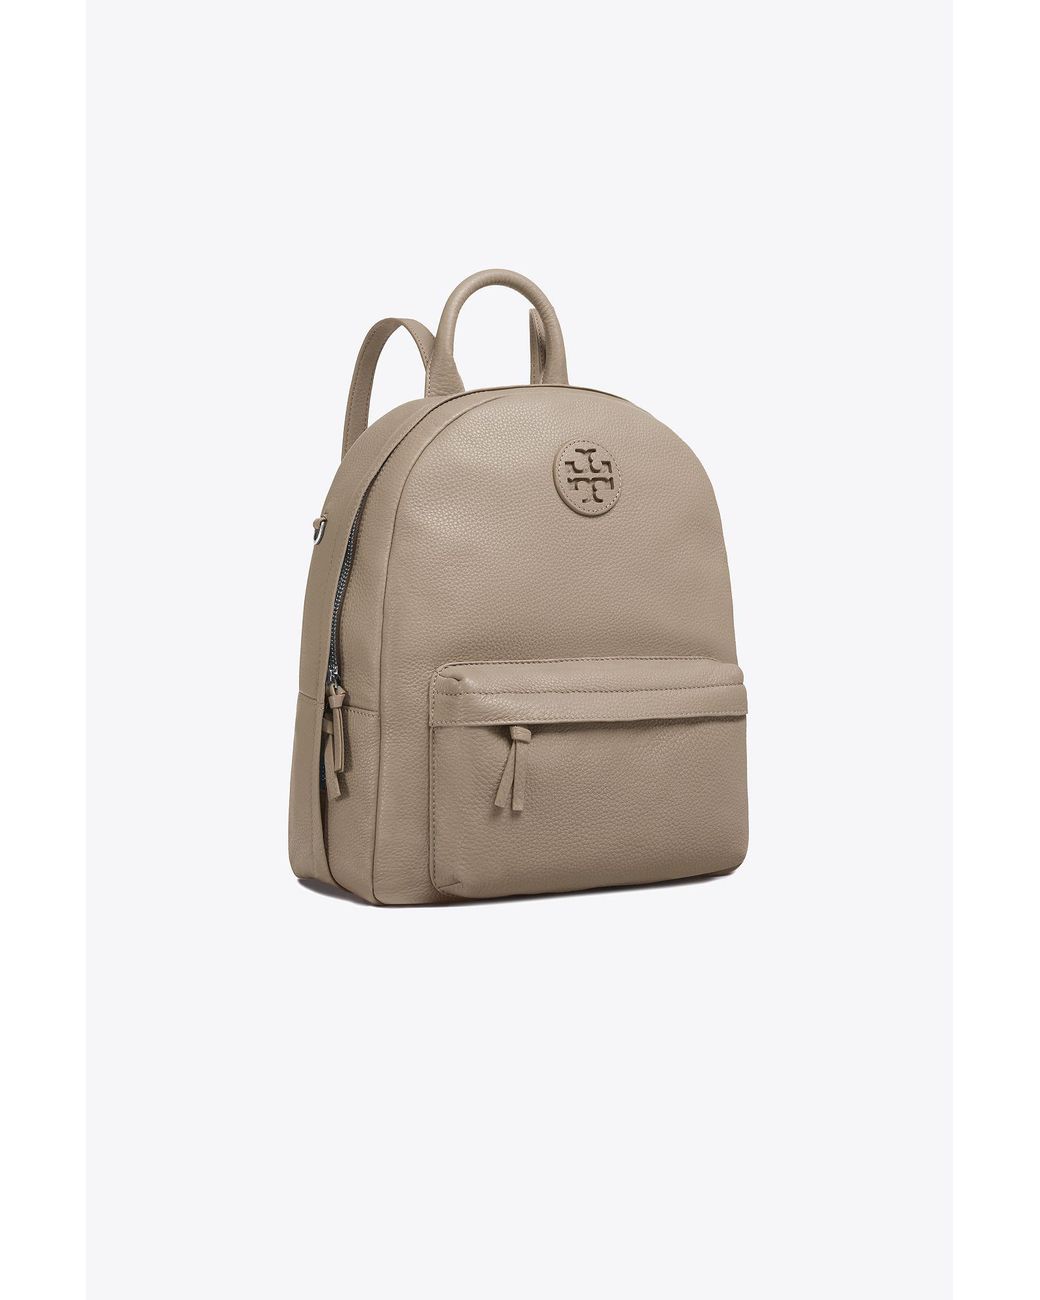 Tory Burch Leather Backpack in Gray | Lyst